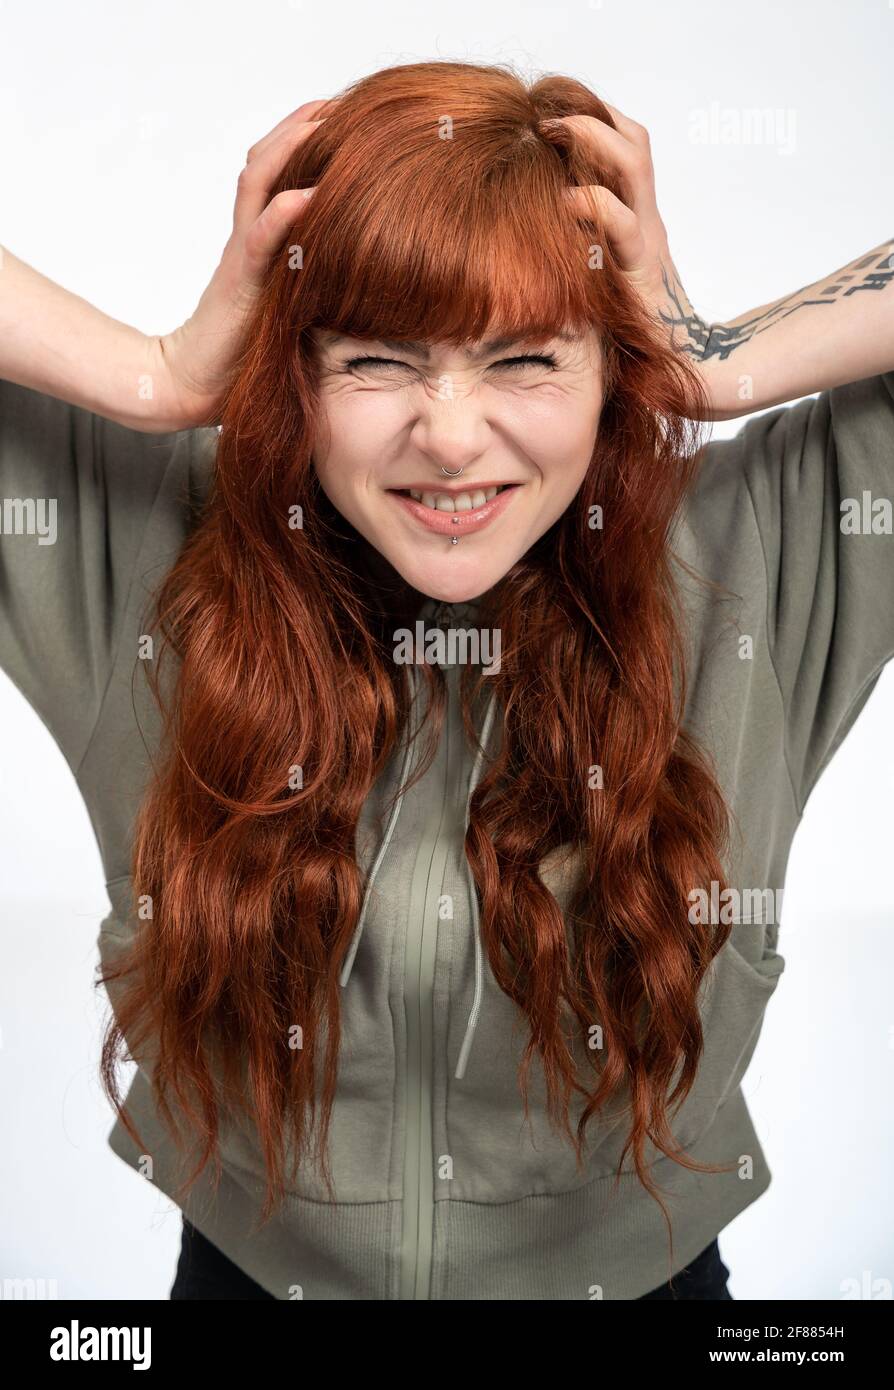 Portrait of a woman with red hair infront of white background with stressed expression pulling hair out Stock Photo